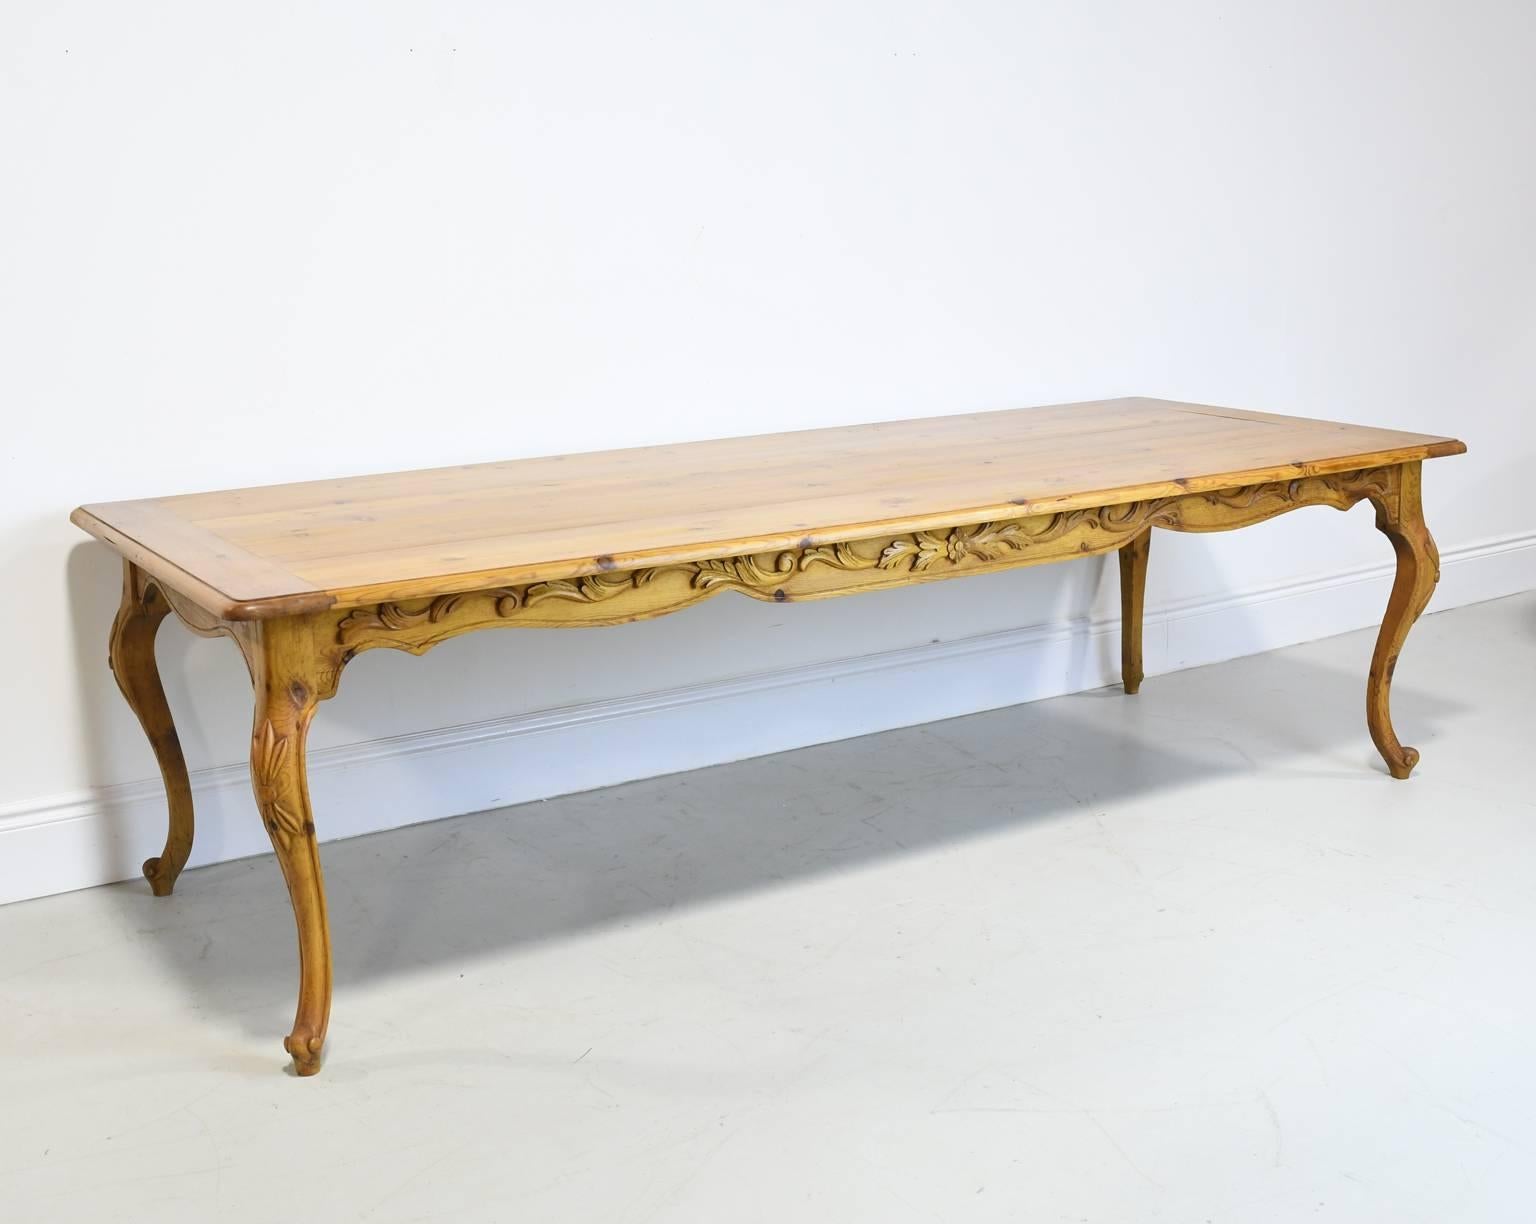 A beautiful custom-made dining table with cabriolet legs with carved knee, & carved aprons. Made entirely from re-purposed antique pine that is over 200 years old.
We have several sizes:
106